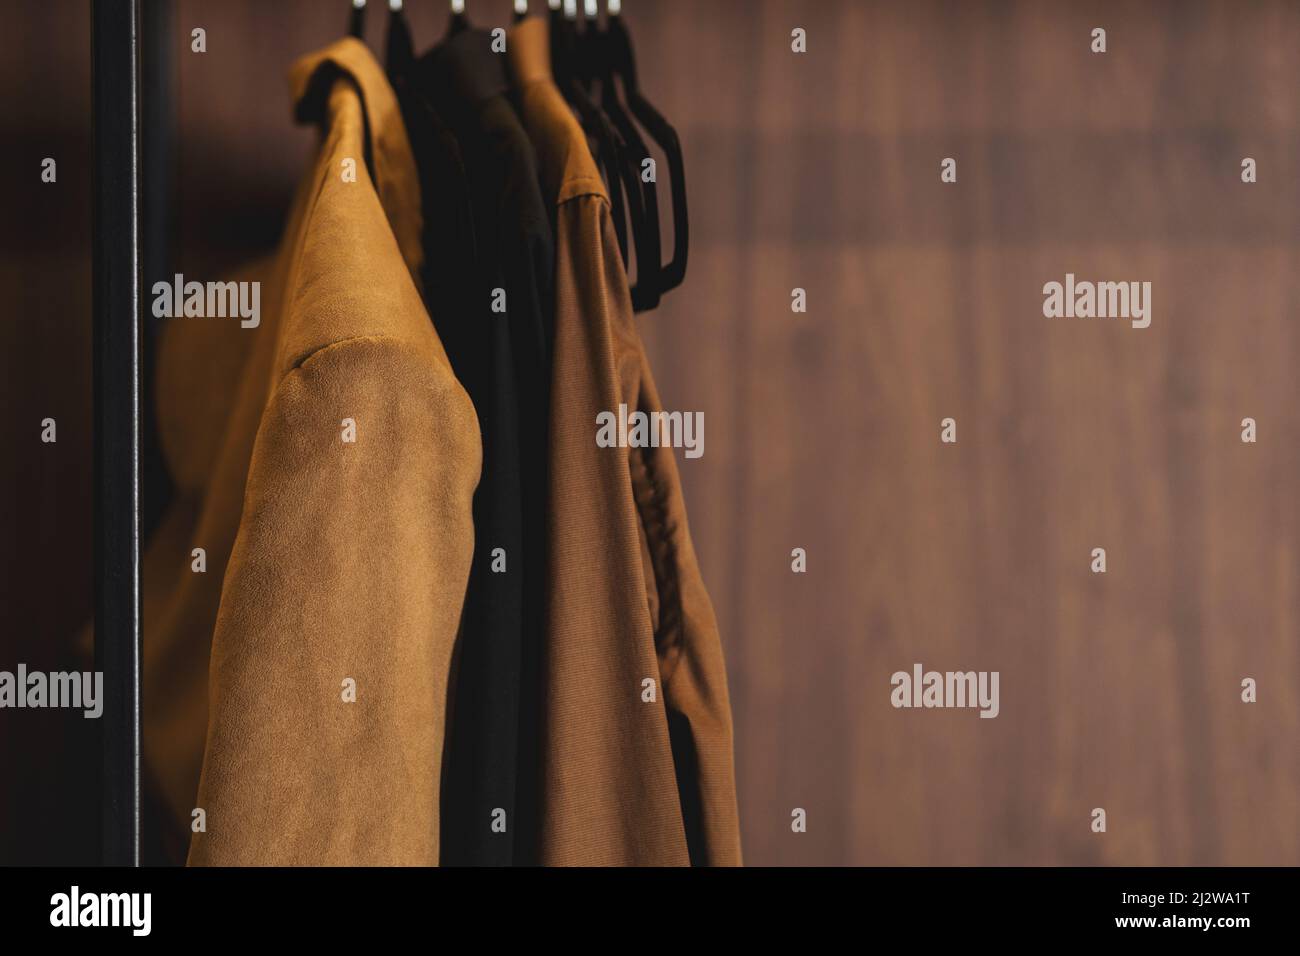 Row of men's suits hanging in closet. menswear store. Stock Photo